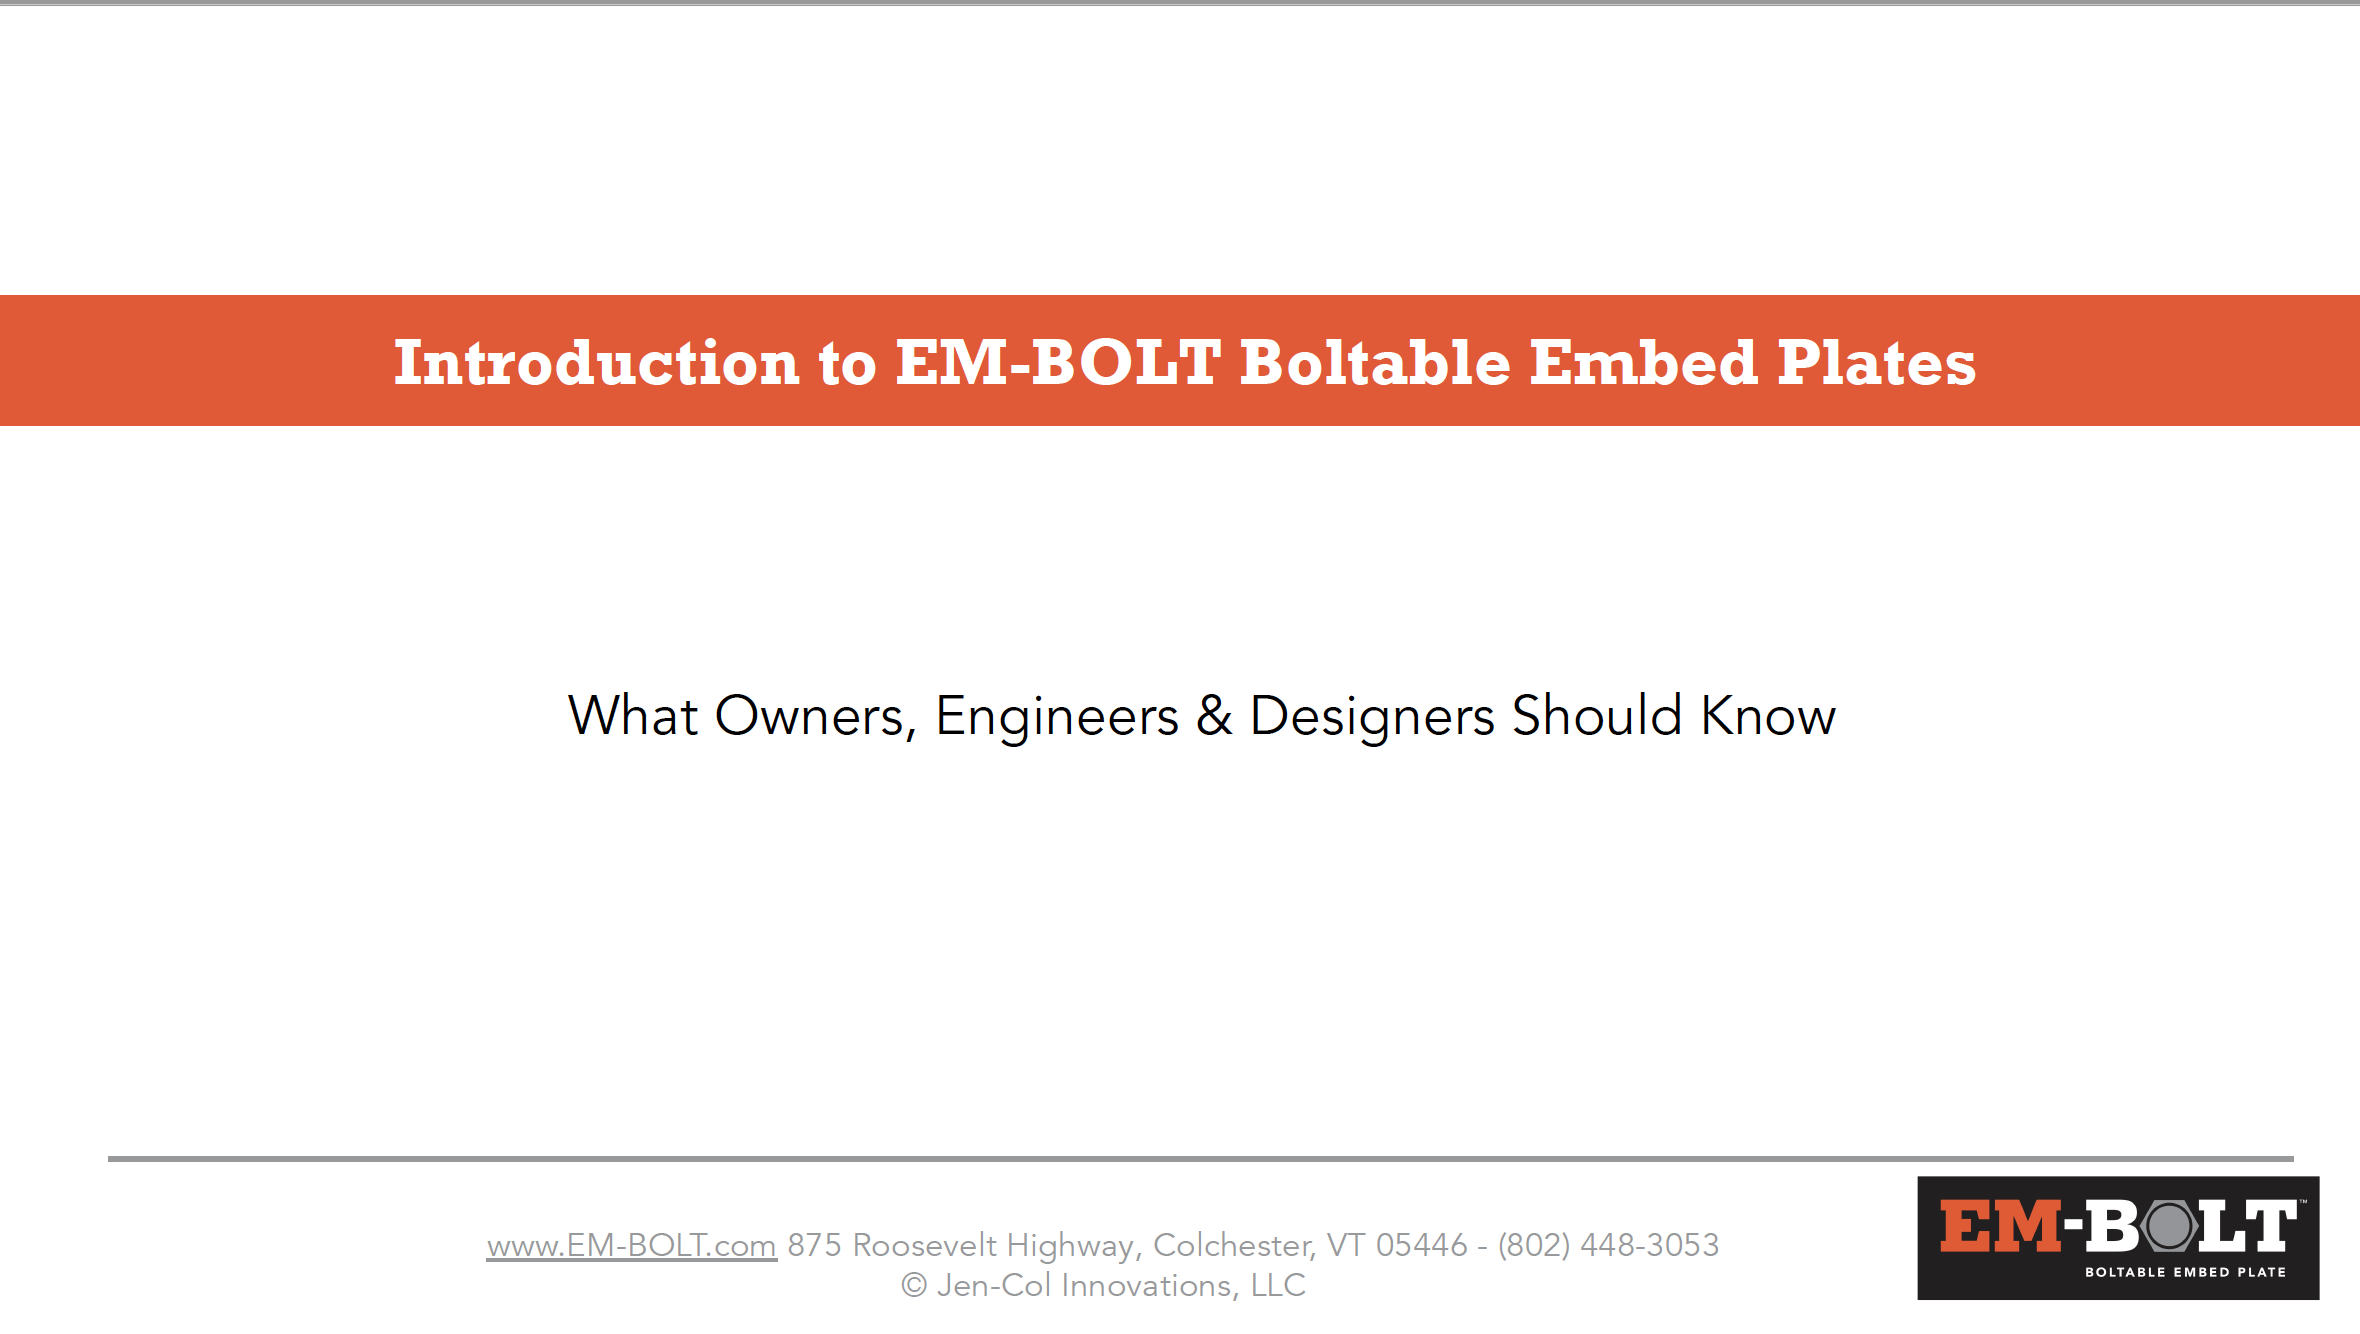 EM-BOLT Ebook - What Owners, Engineers & Designers Should Know